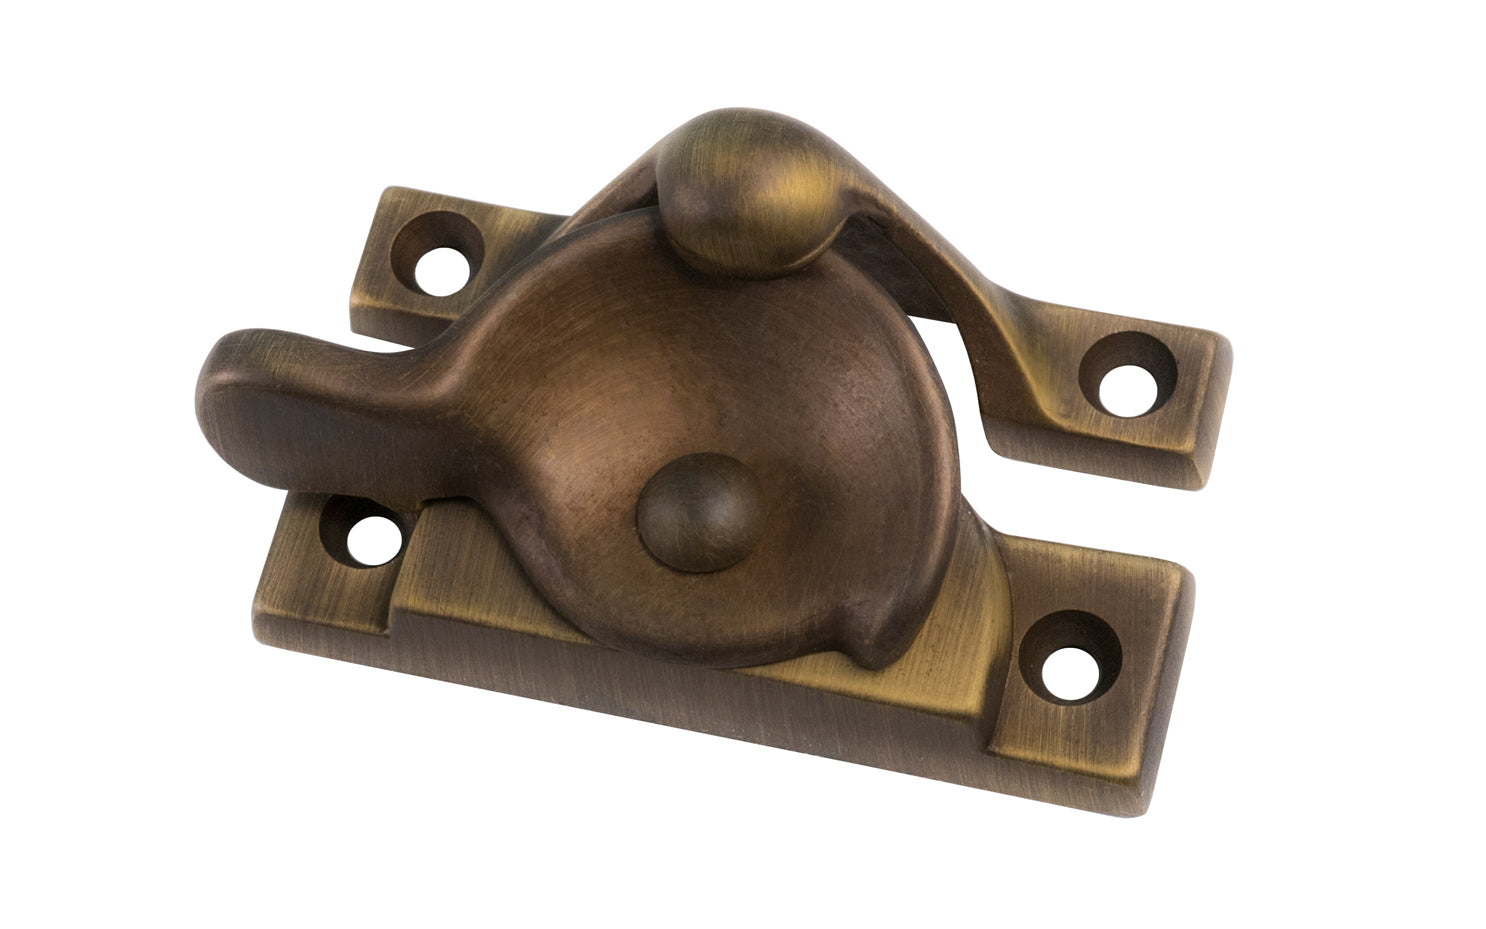 High quality classic solid brass crescent-style sash lock with square corners designed for hung or sash windows. Solid brass material with a durable pivot turn. 2-1/2" x 1" Size Lock. Antique Brass Finish.